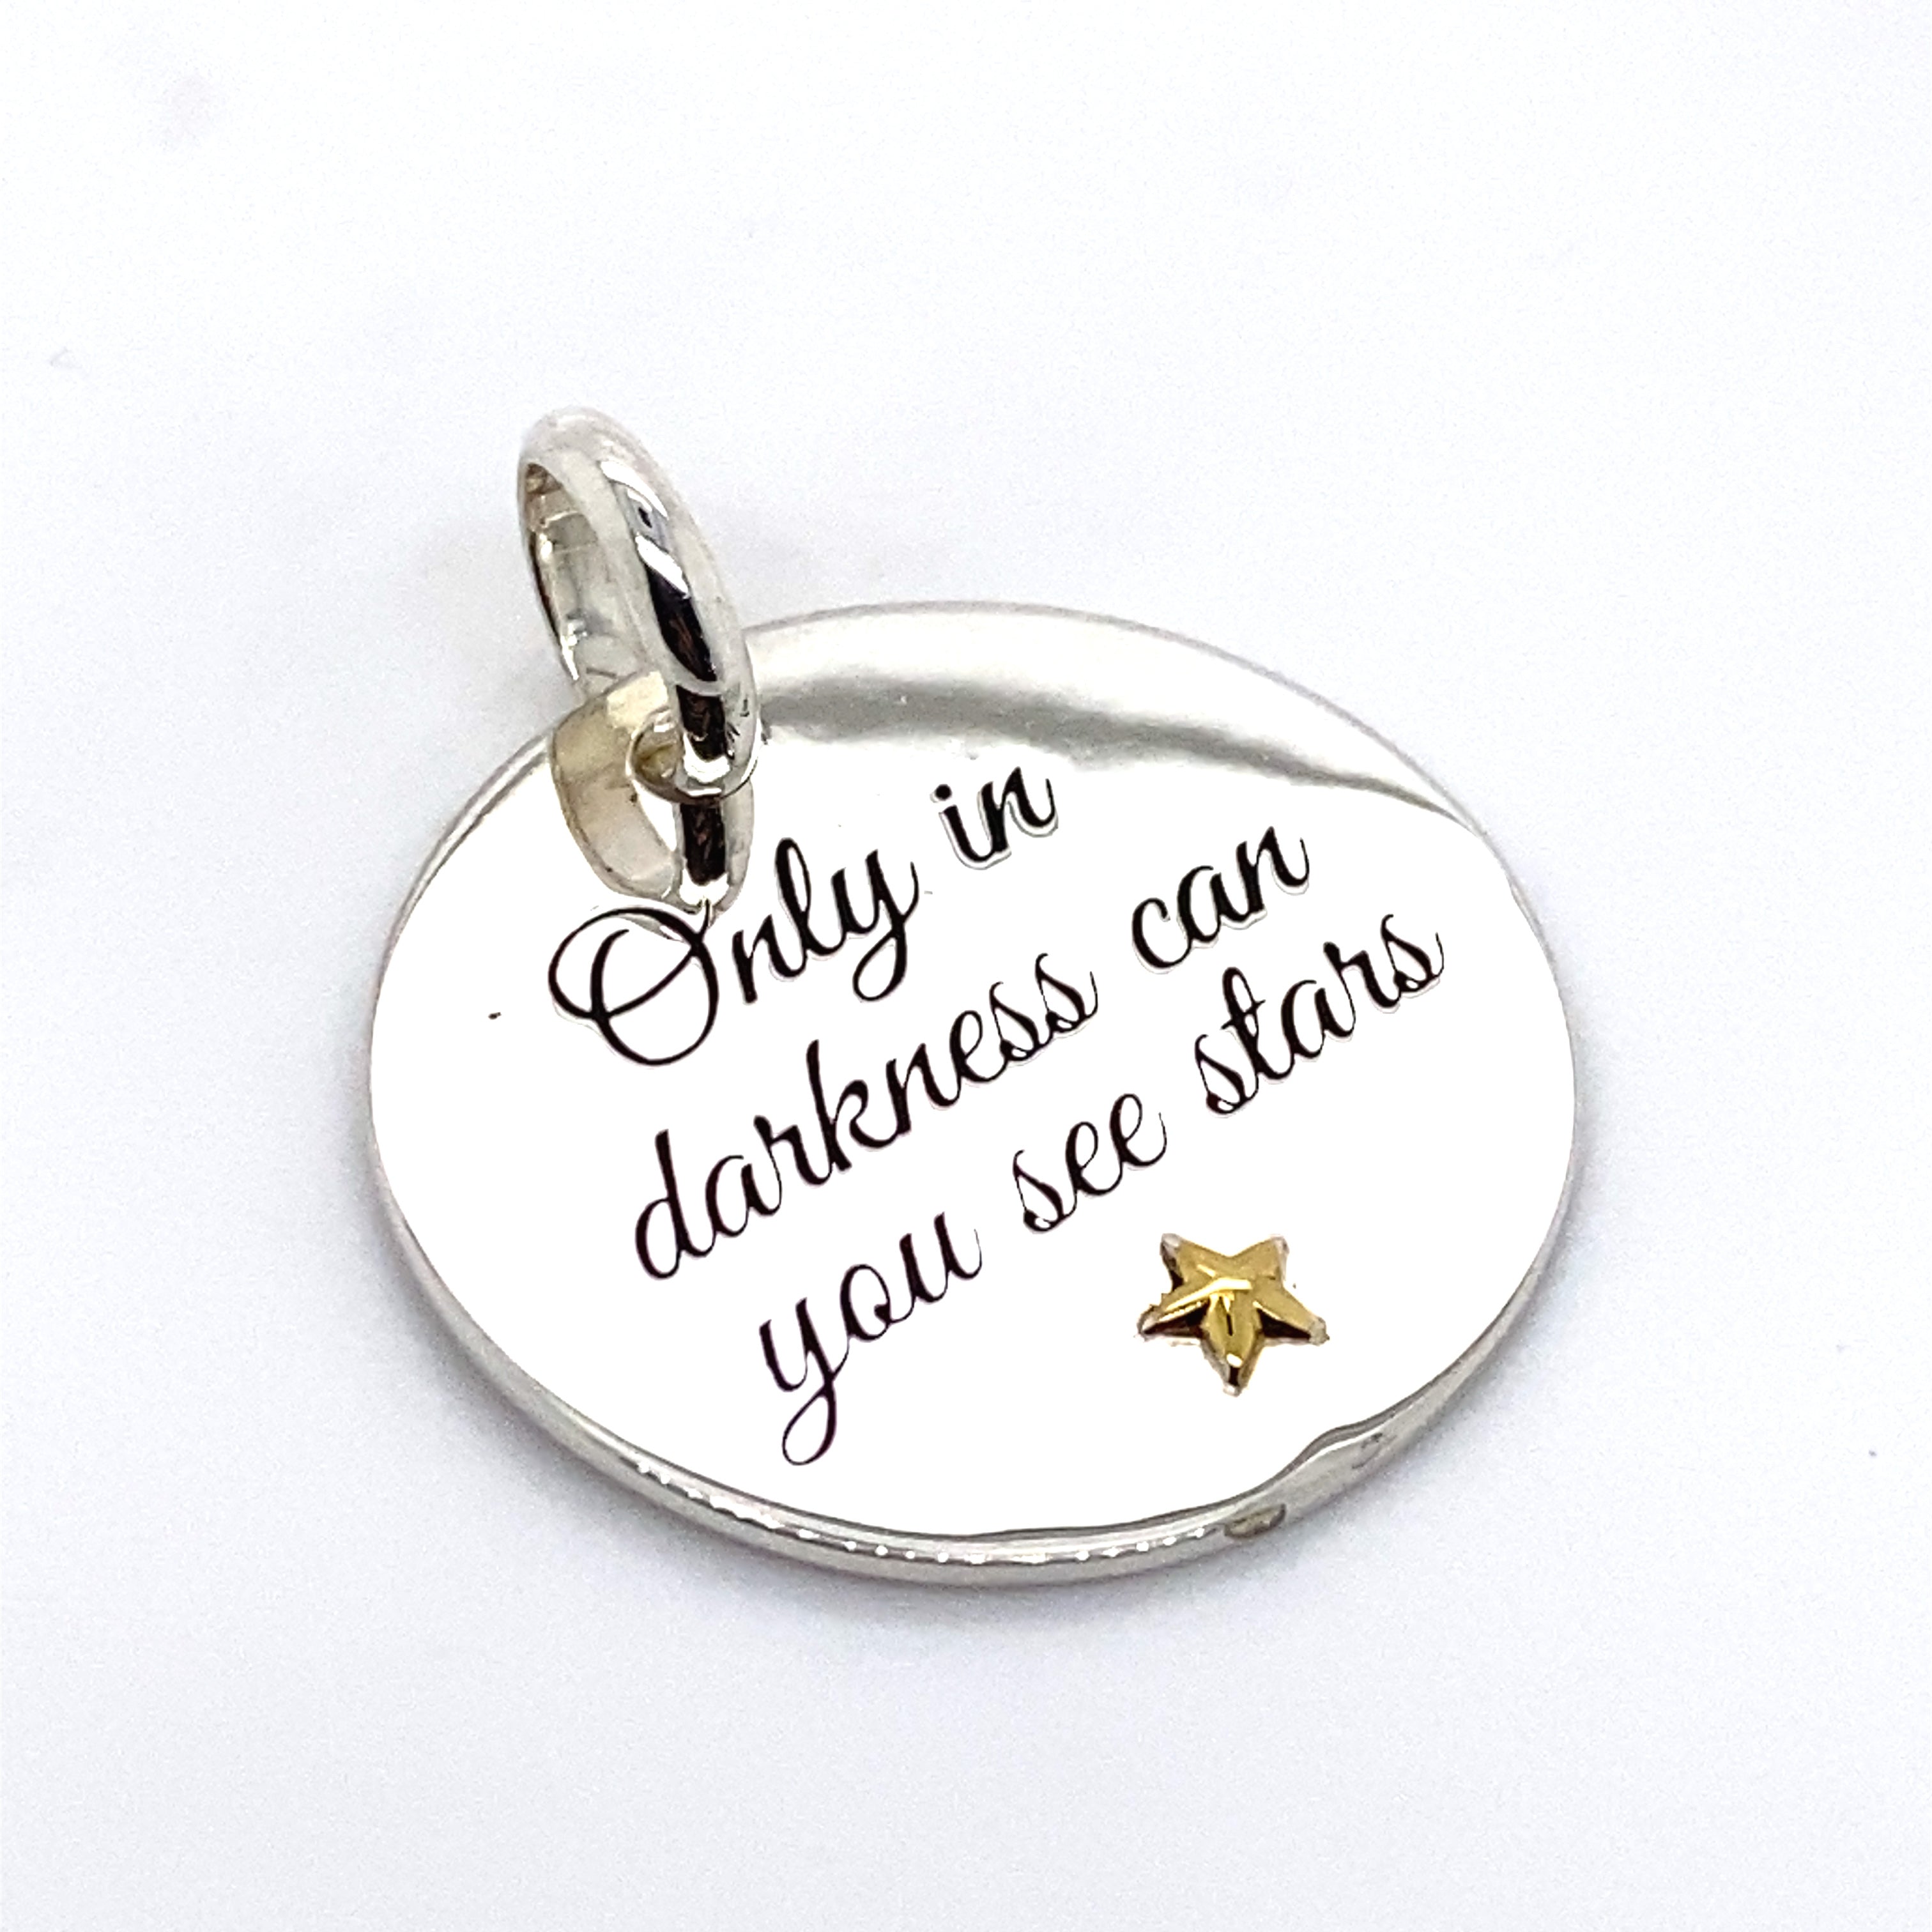 only in darkness can you see stars pendant charm